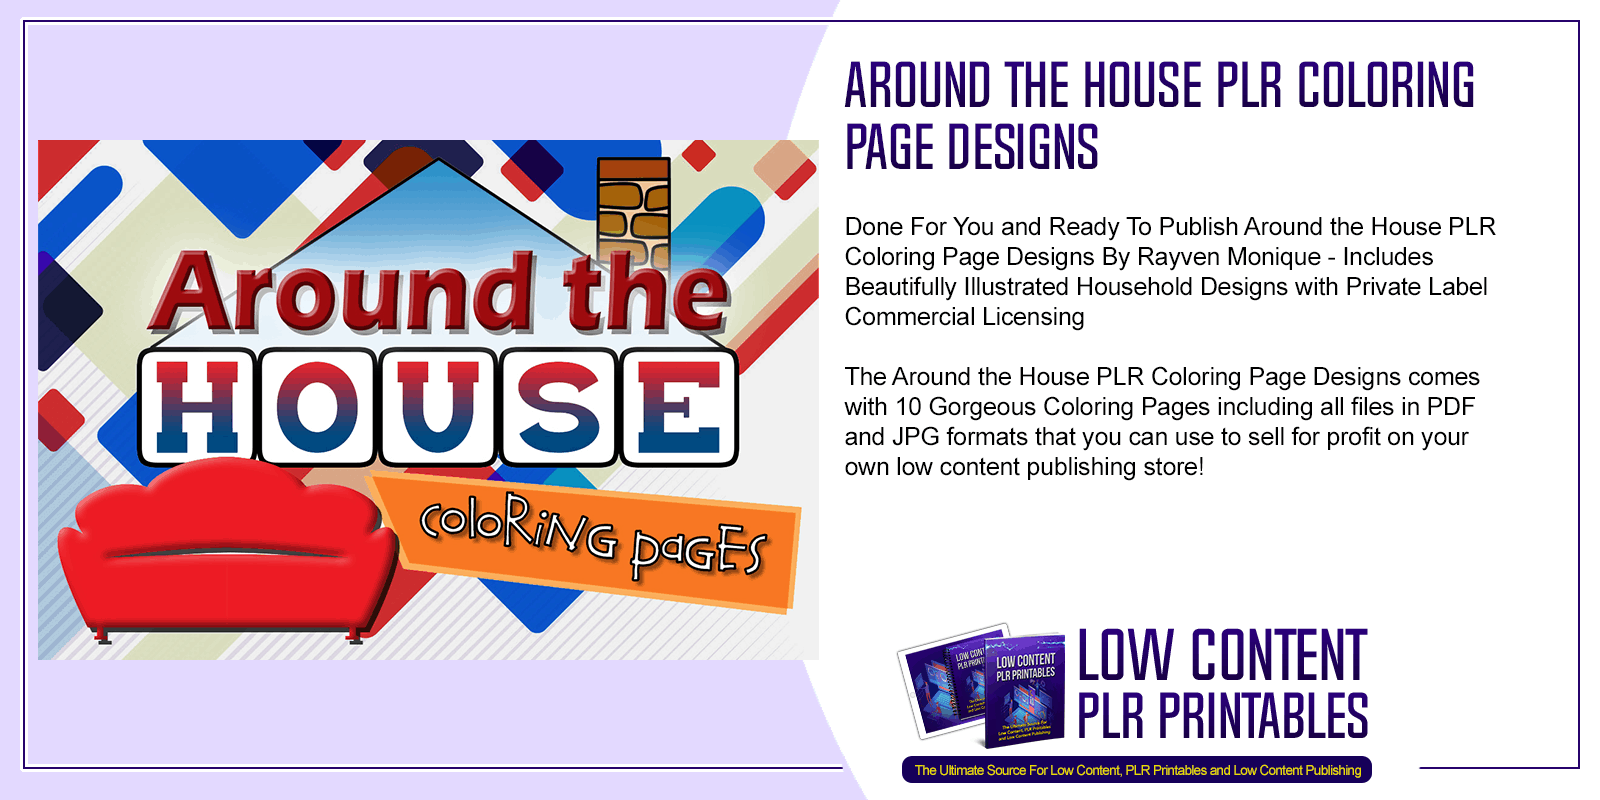 Around the House PLR Coloring Page Designs